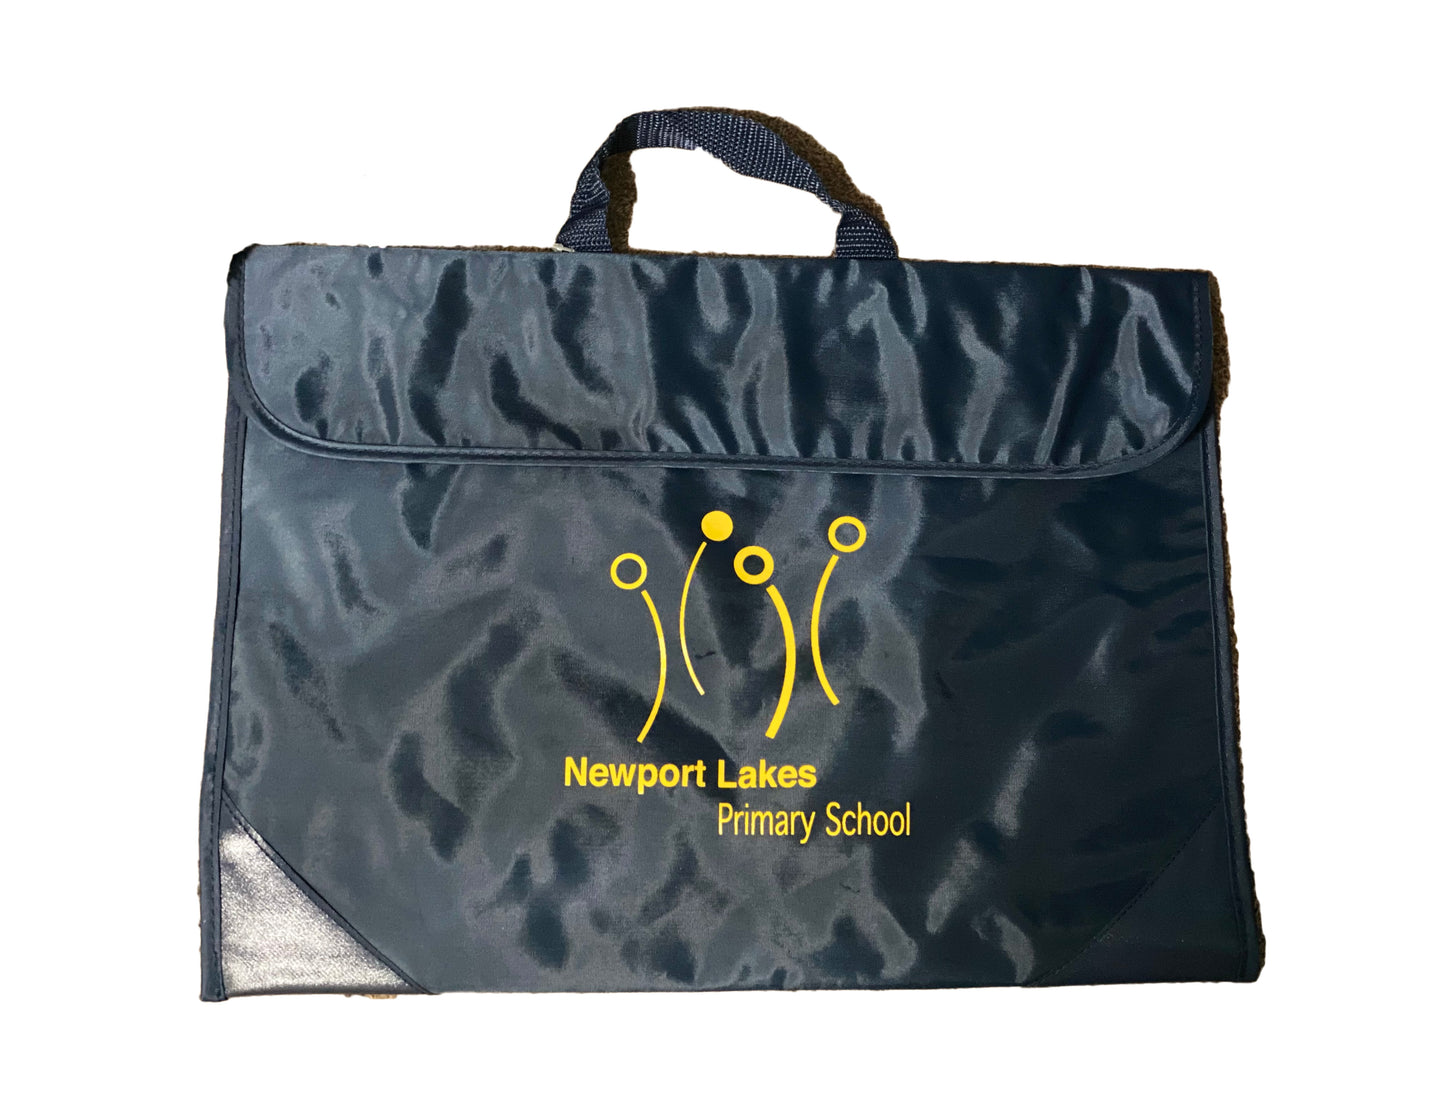 NEWPORT LAKES PRIMARY LIBRARY BAG